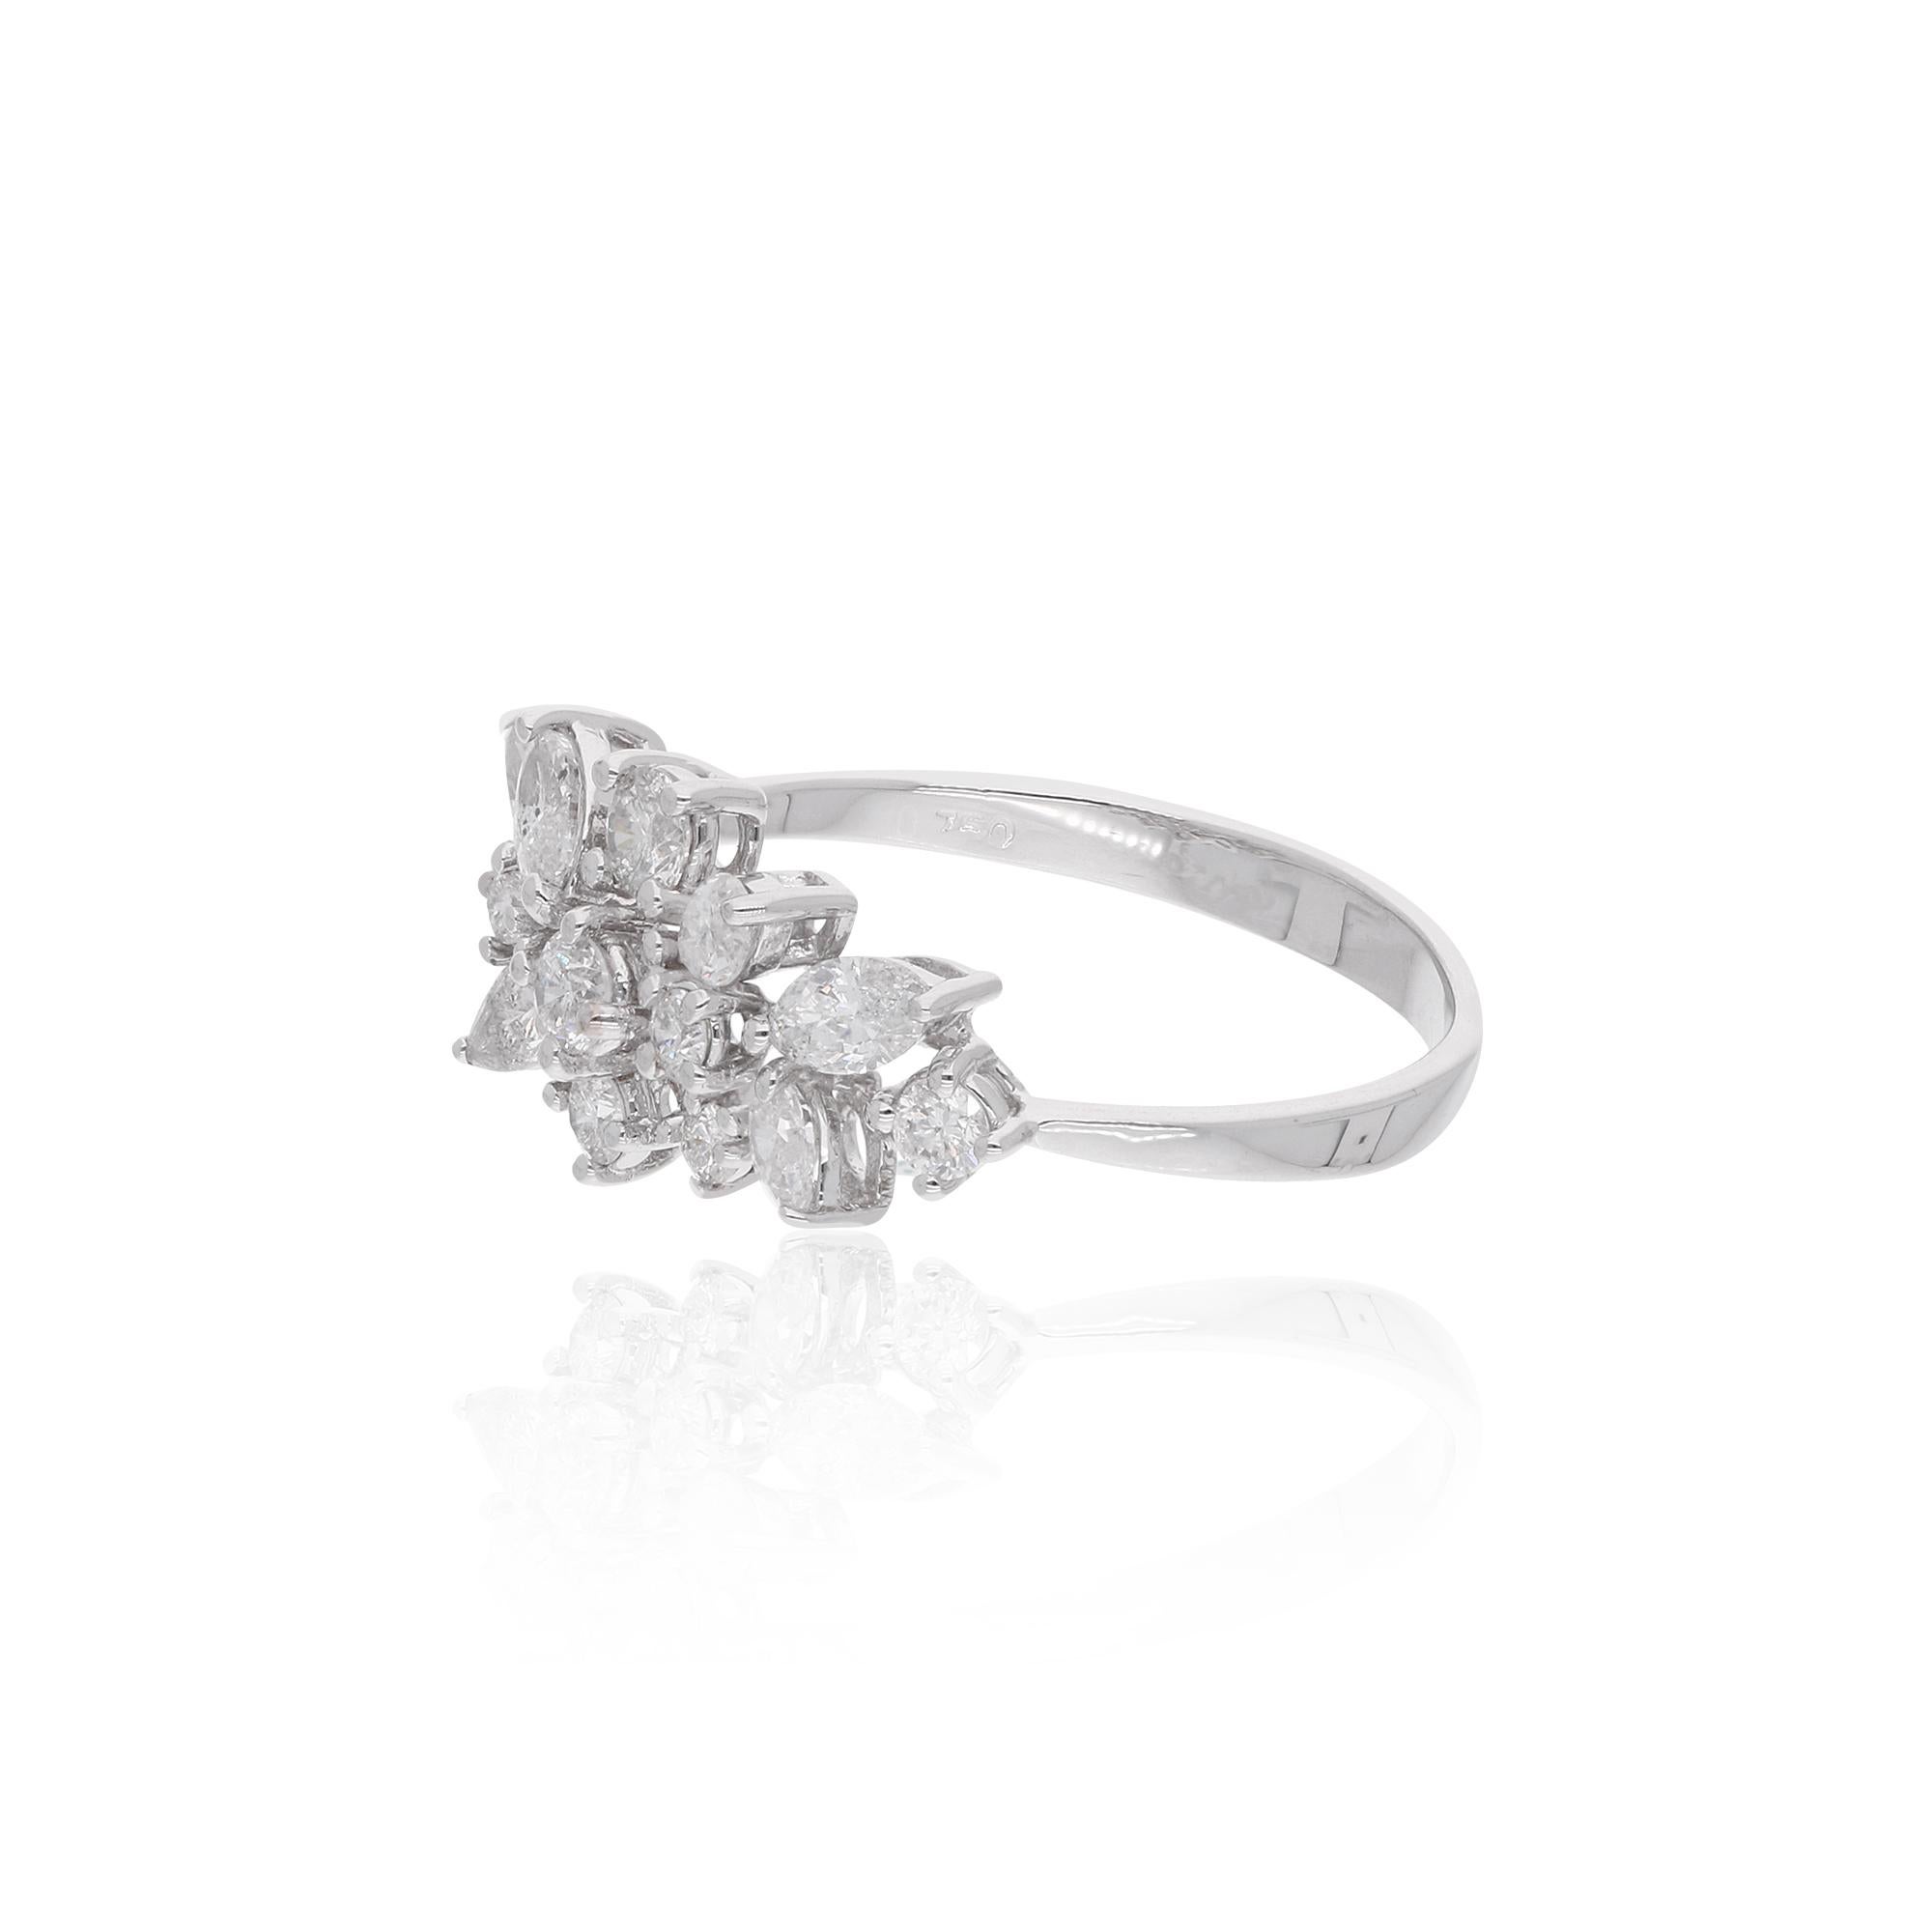 Embrace the epitome of elegance and sophistication with this exquisite Natural Marquise, Round & Pear Diamond Ring, meticulously handcrafted in radiant 14 Karat White Gold. This stunning piece of handmade jewelry is a radiant celebration of timeless